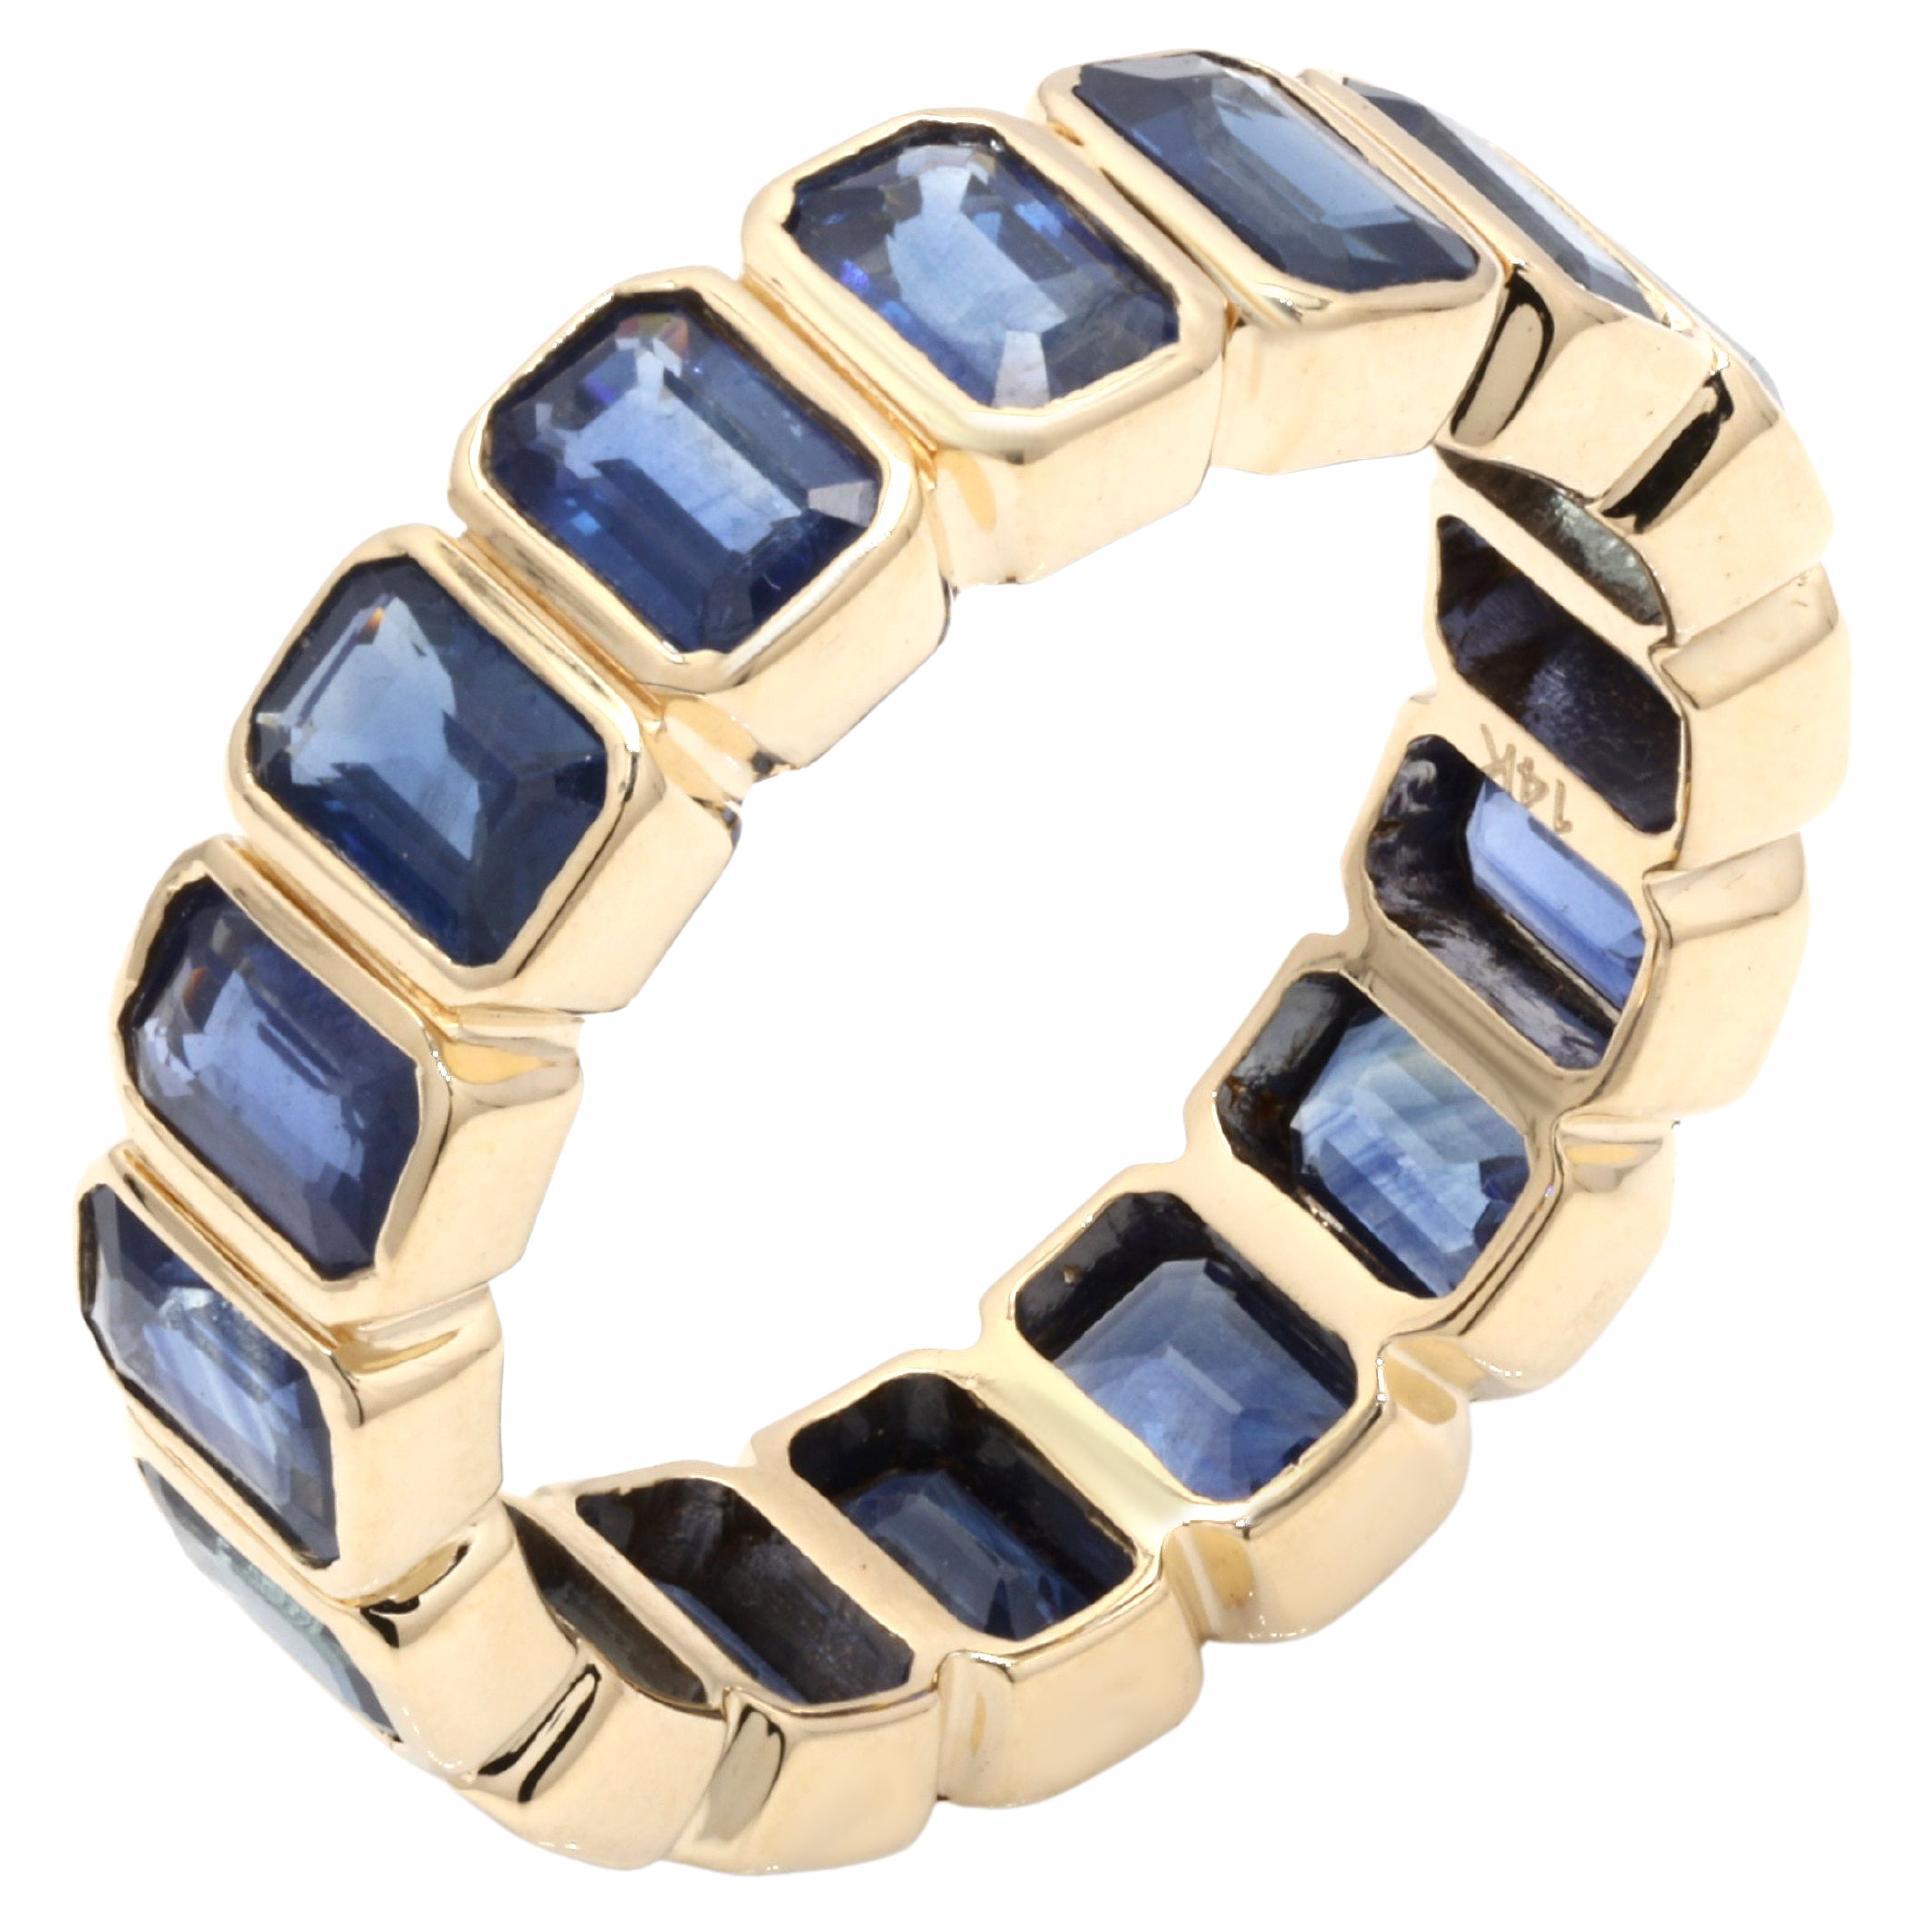 For Sale:  14K Yellow Gold Mounted 5.11 ct Blue Sapphire Eternity Band Ring Stacking Ring